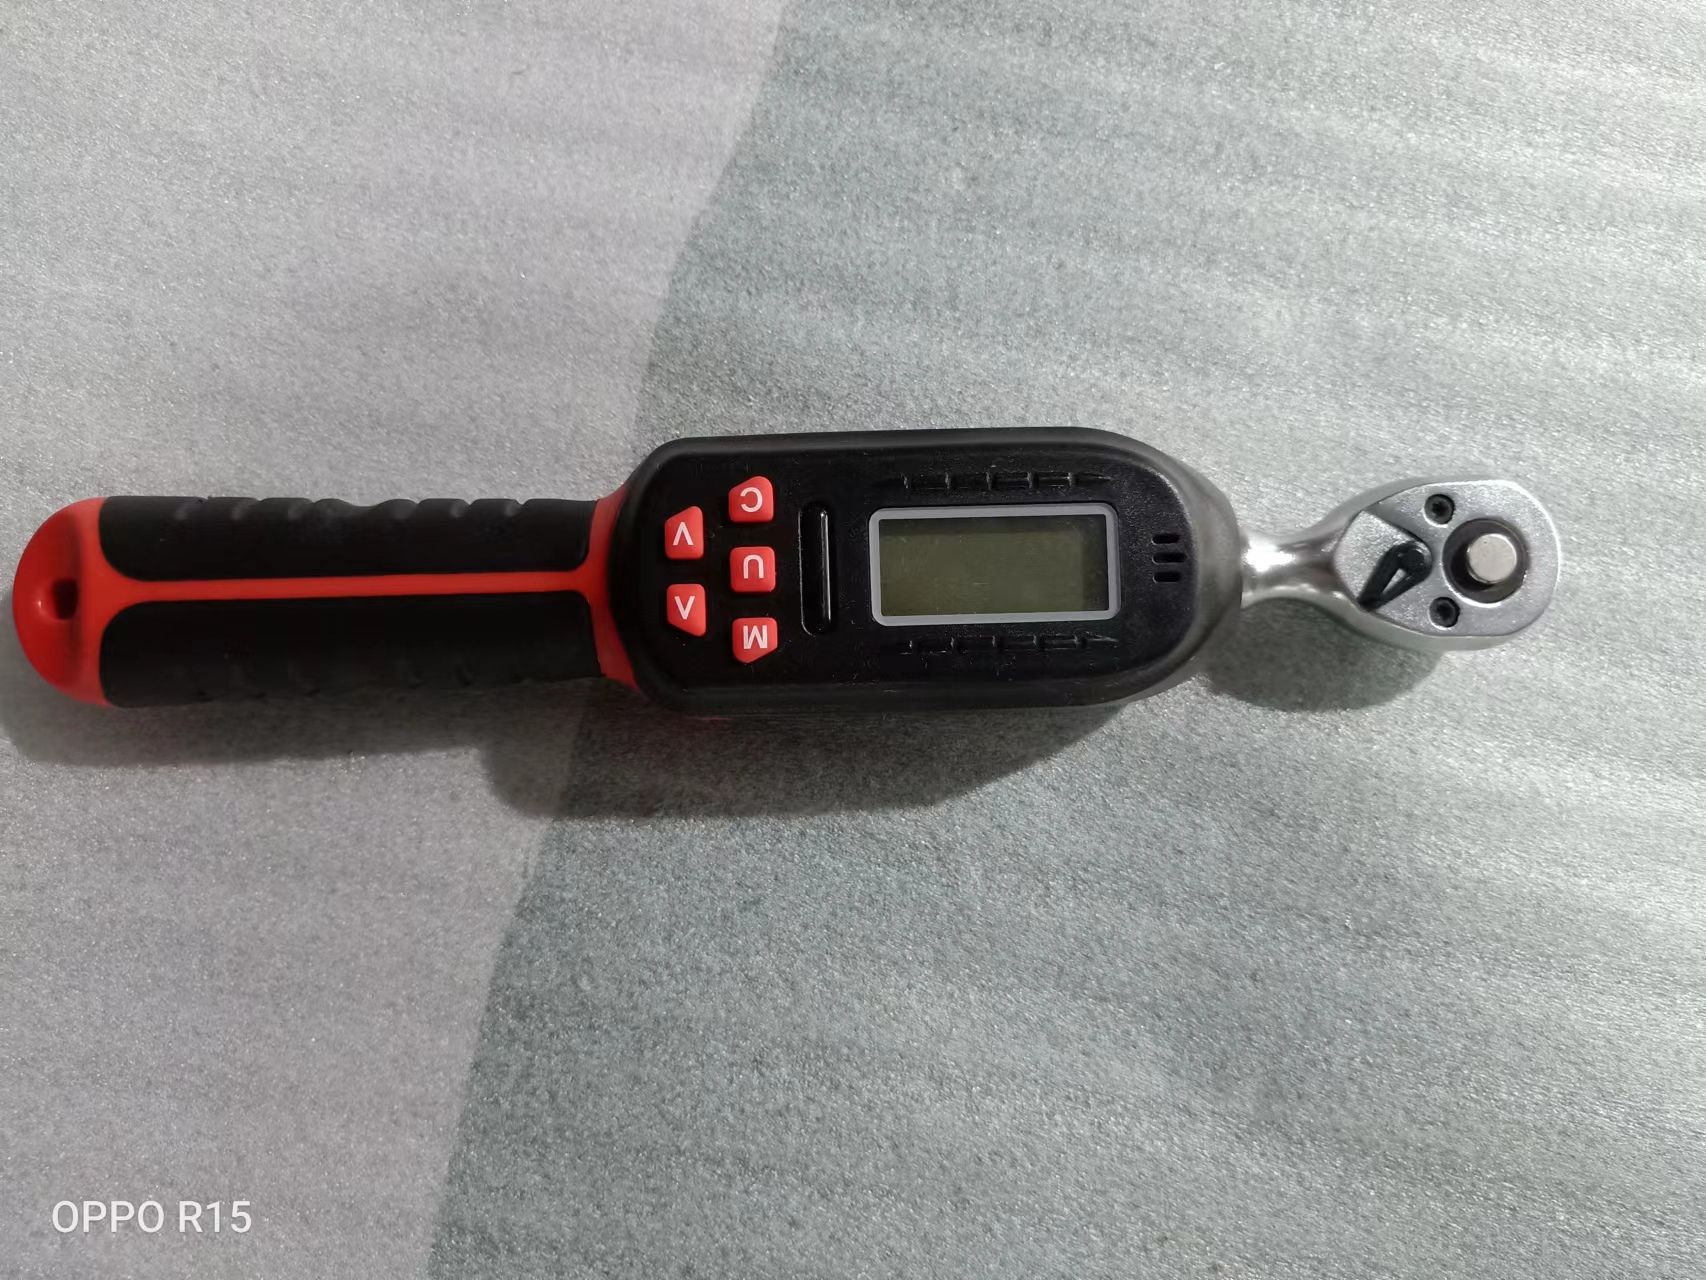 Mini Digital Torque Wrench Calibration Adjustable Manual Torque Wrench for Motorcycles